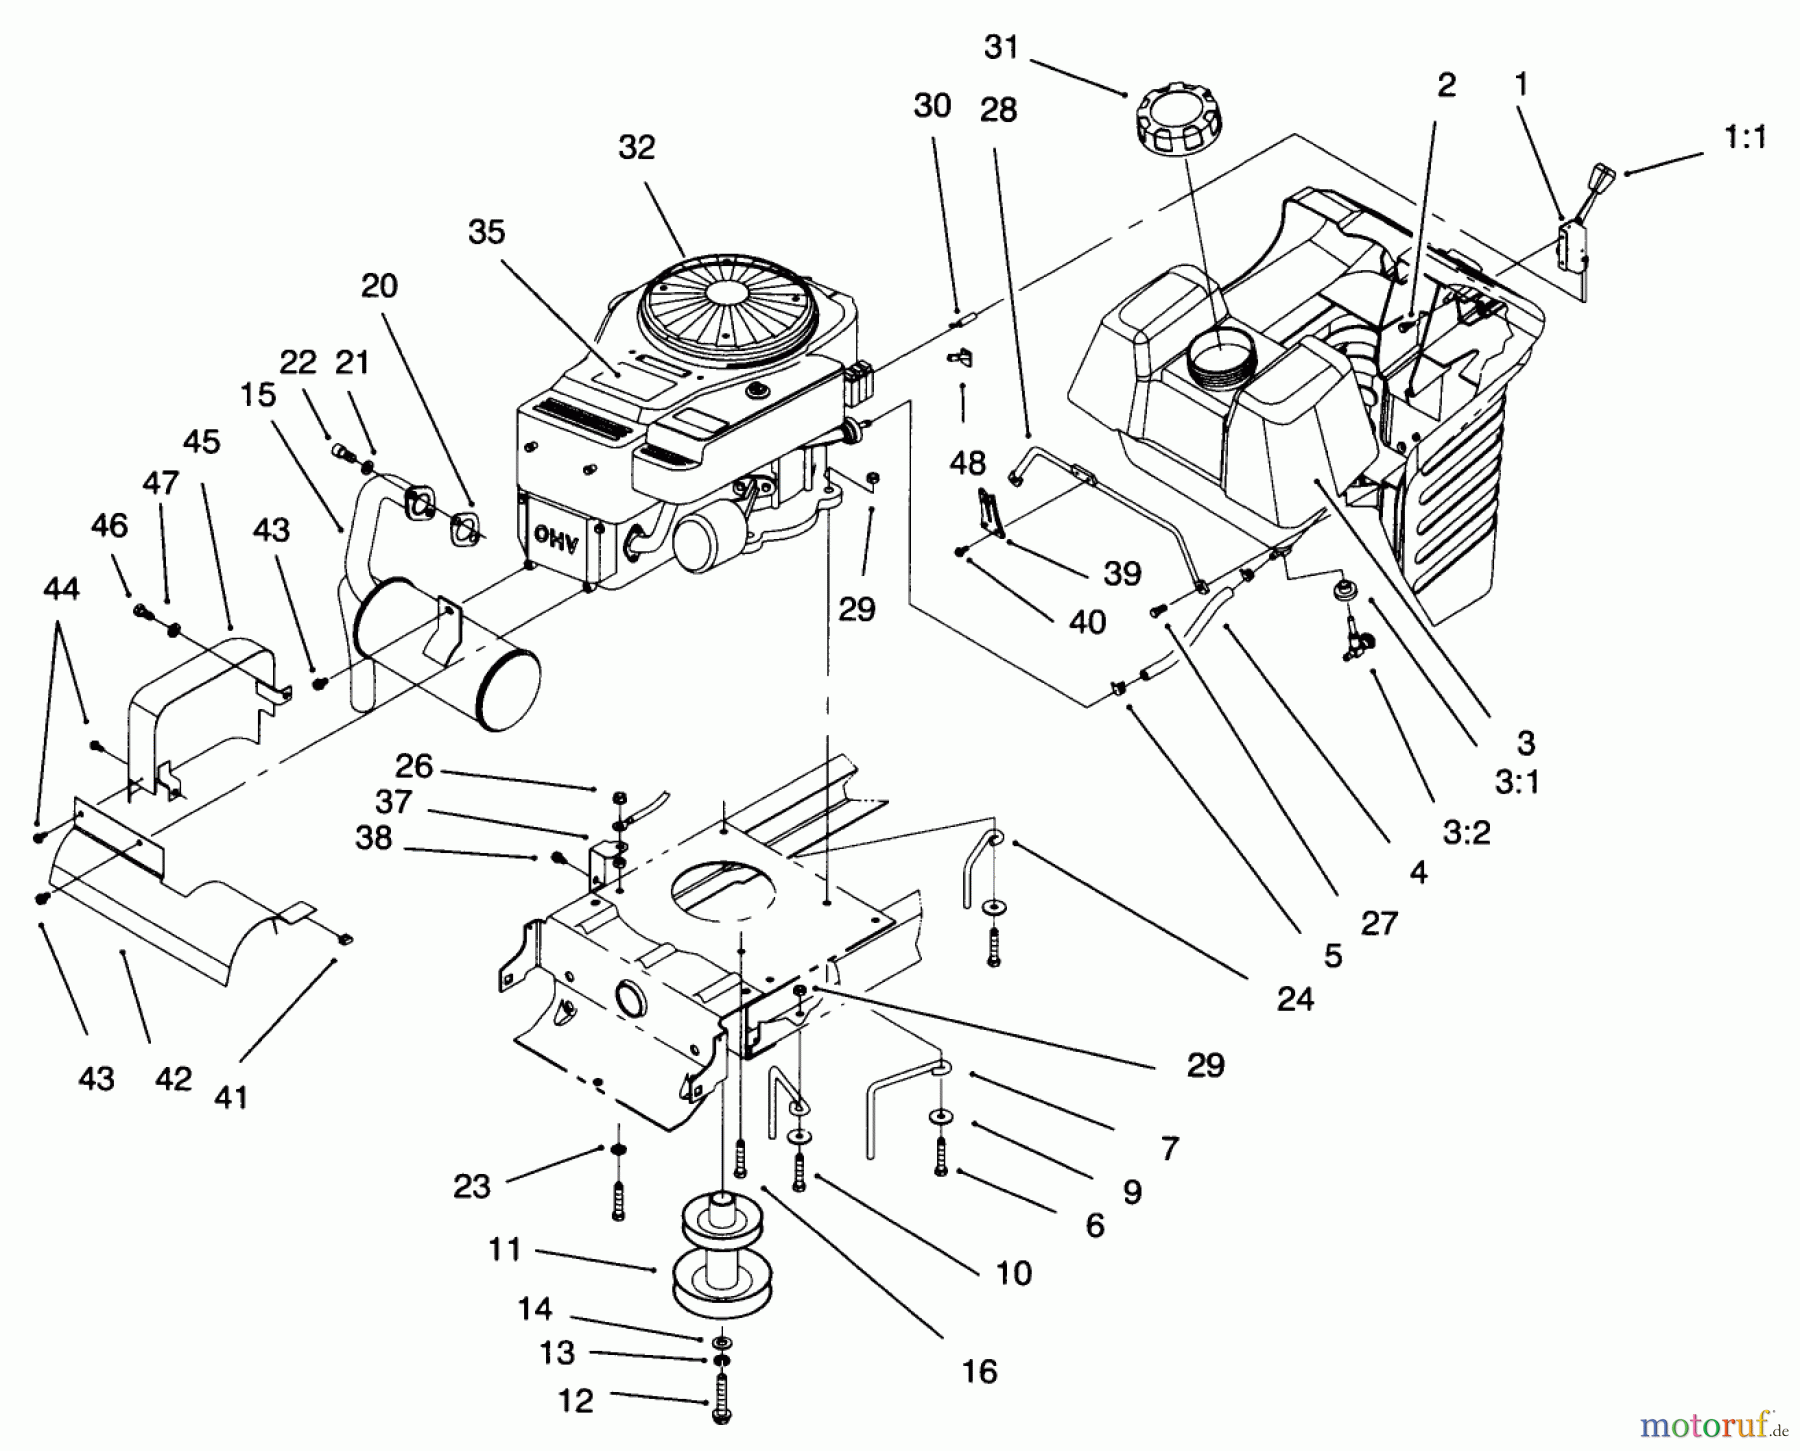  Toro Neu Mowers, Lawn & Garden Tractor Seite 1 71193 (14-38HXL) - Toro 14-38HXL Lawn Tractor, 1996 (6900001-6999999) ENGINE SYSTEM COMPONENTS ASSEMBLY